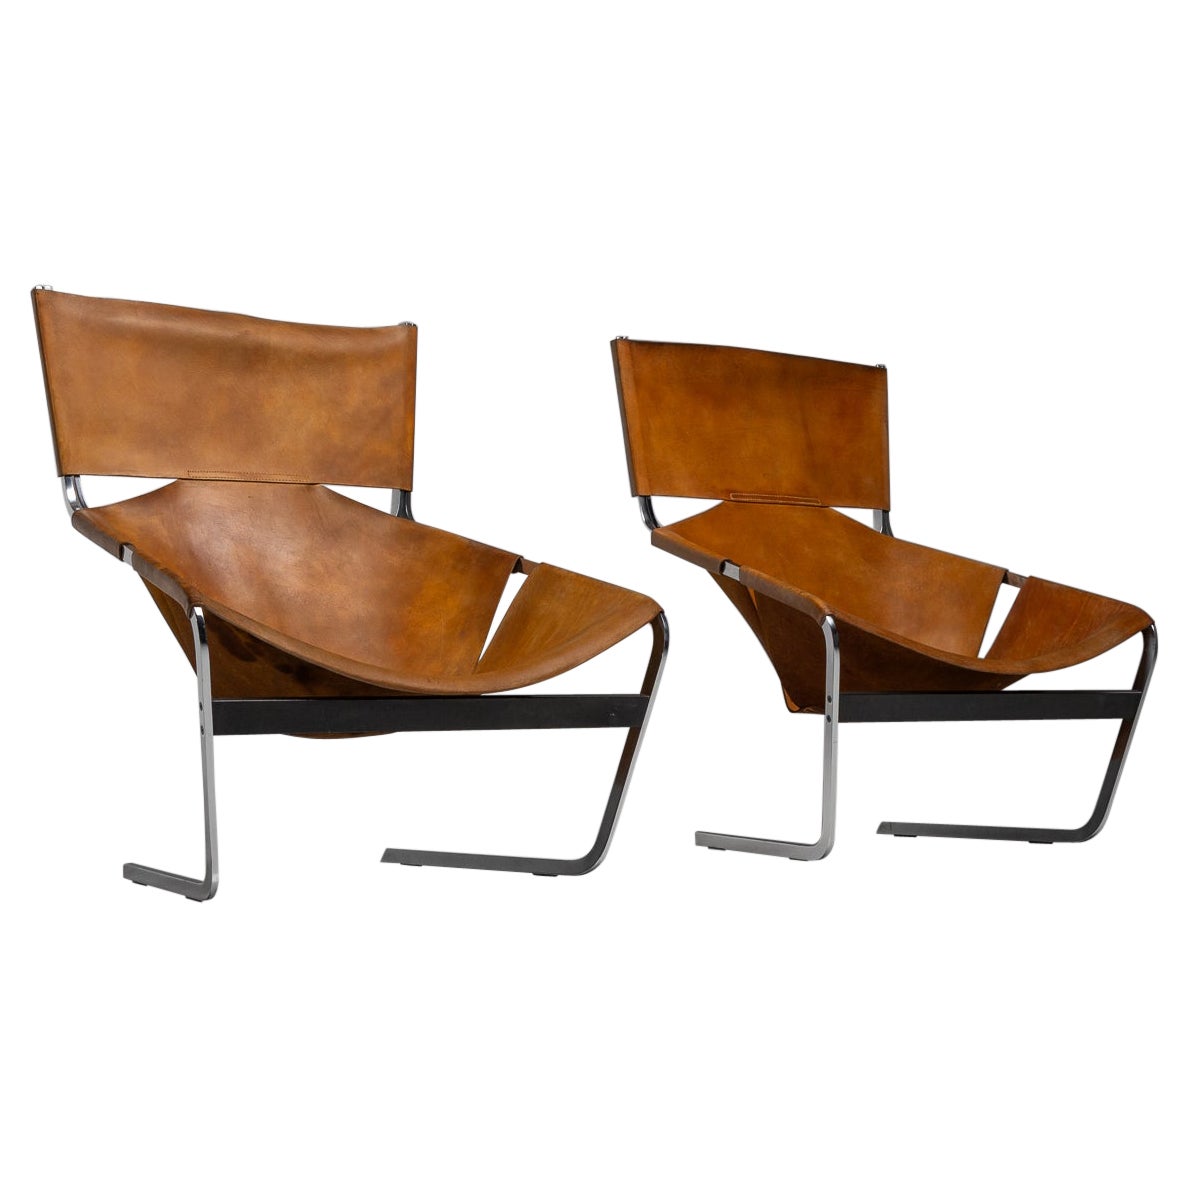 Pierre Paulin F444 lounge chairs pair Artifort 1963 For Sale